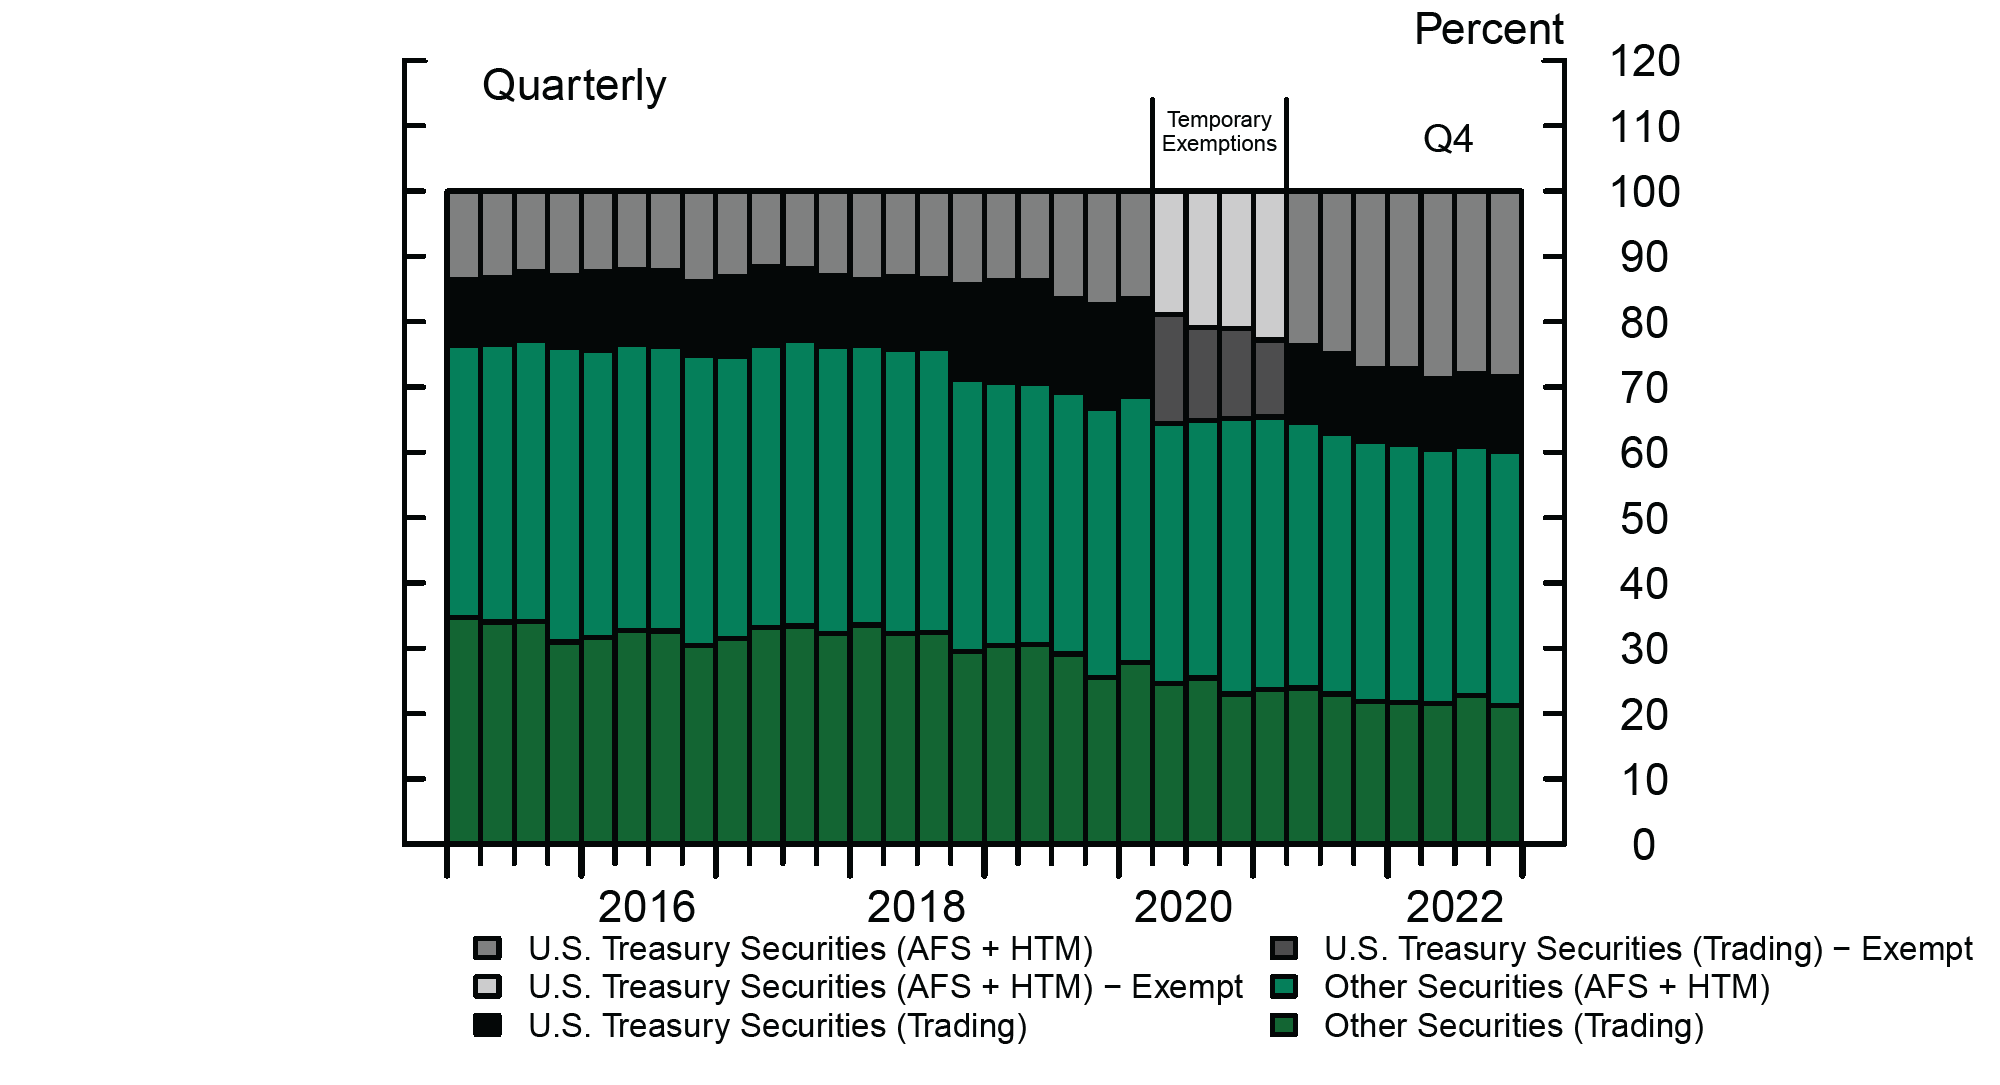 Figure 5. Percent Contributions by Security Type (Panel B). See accessible link for data.